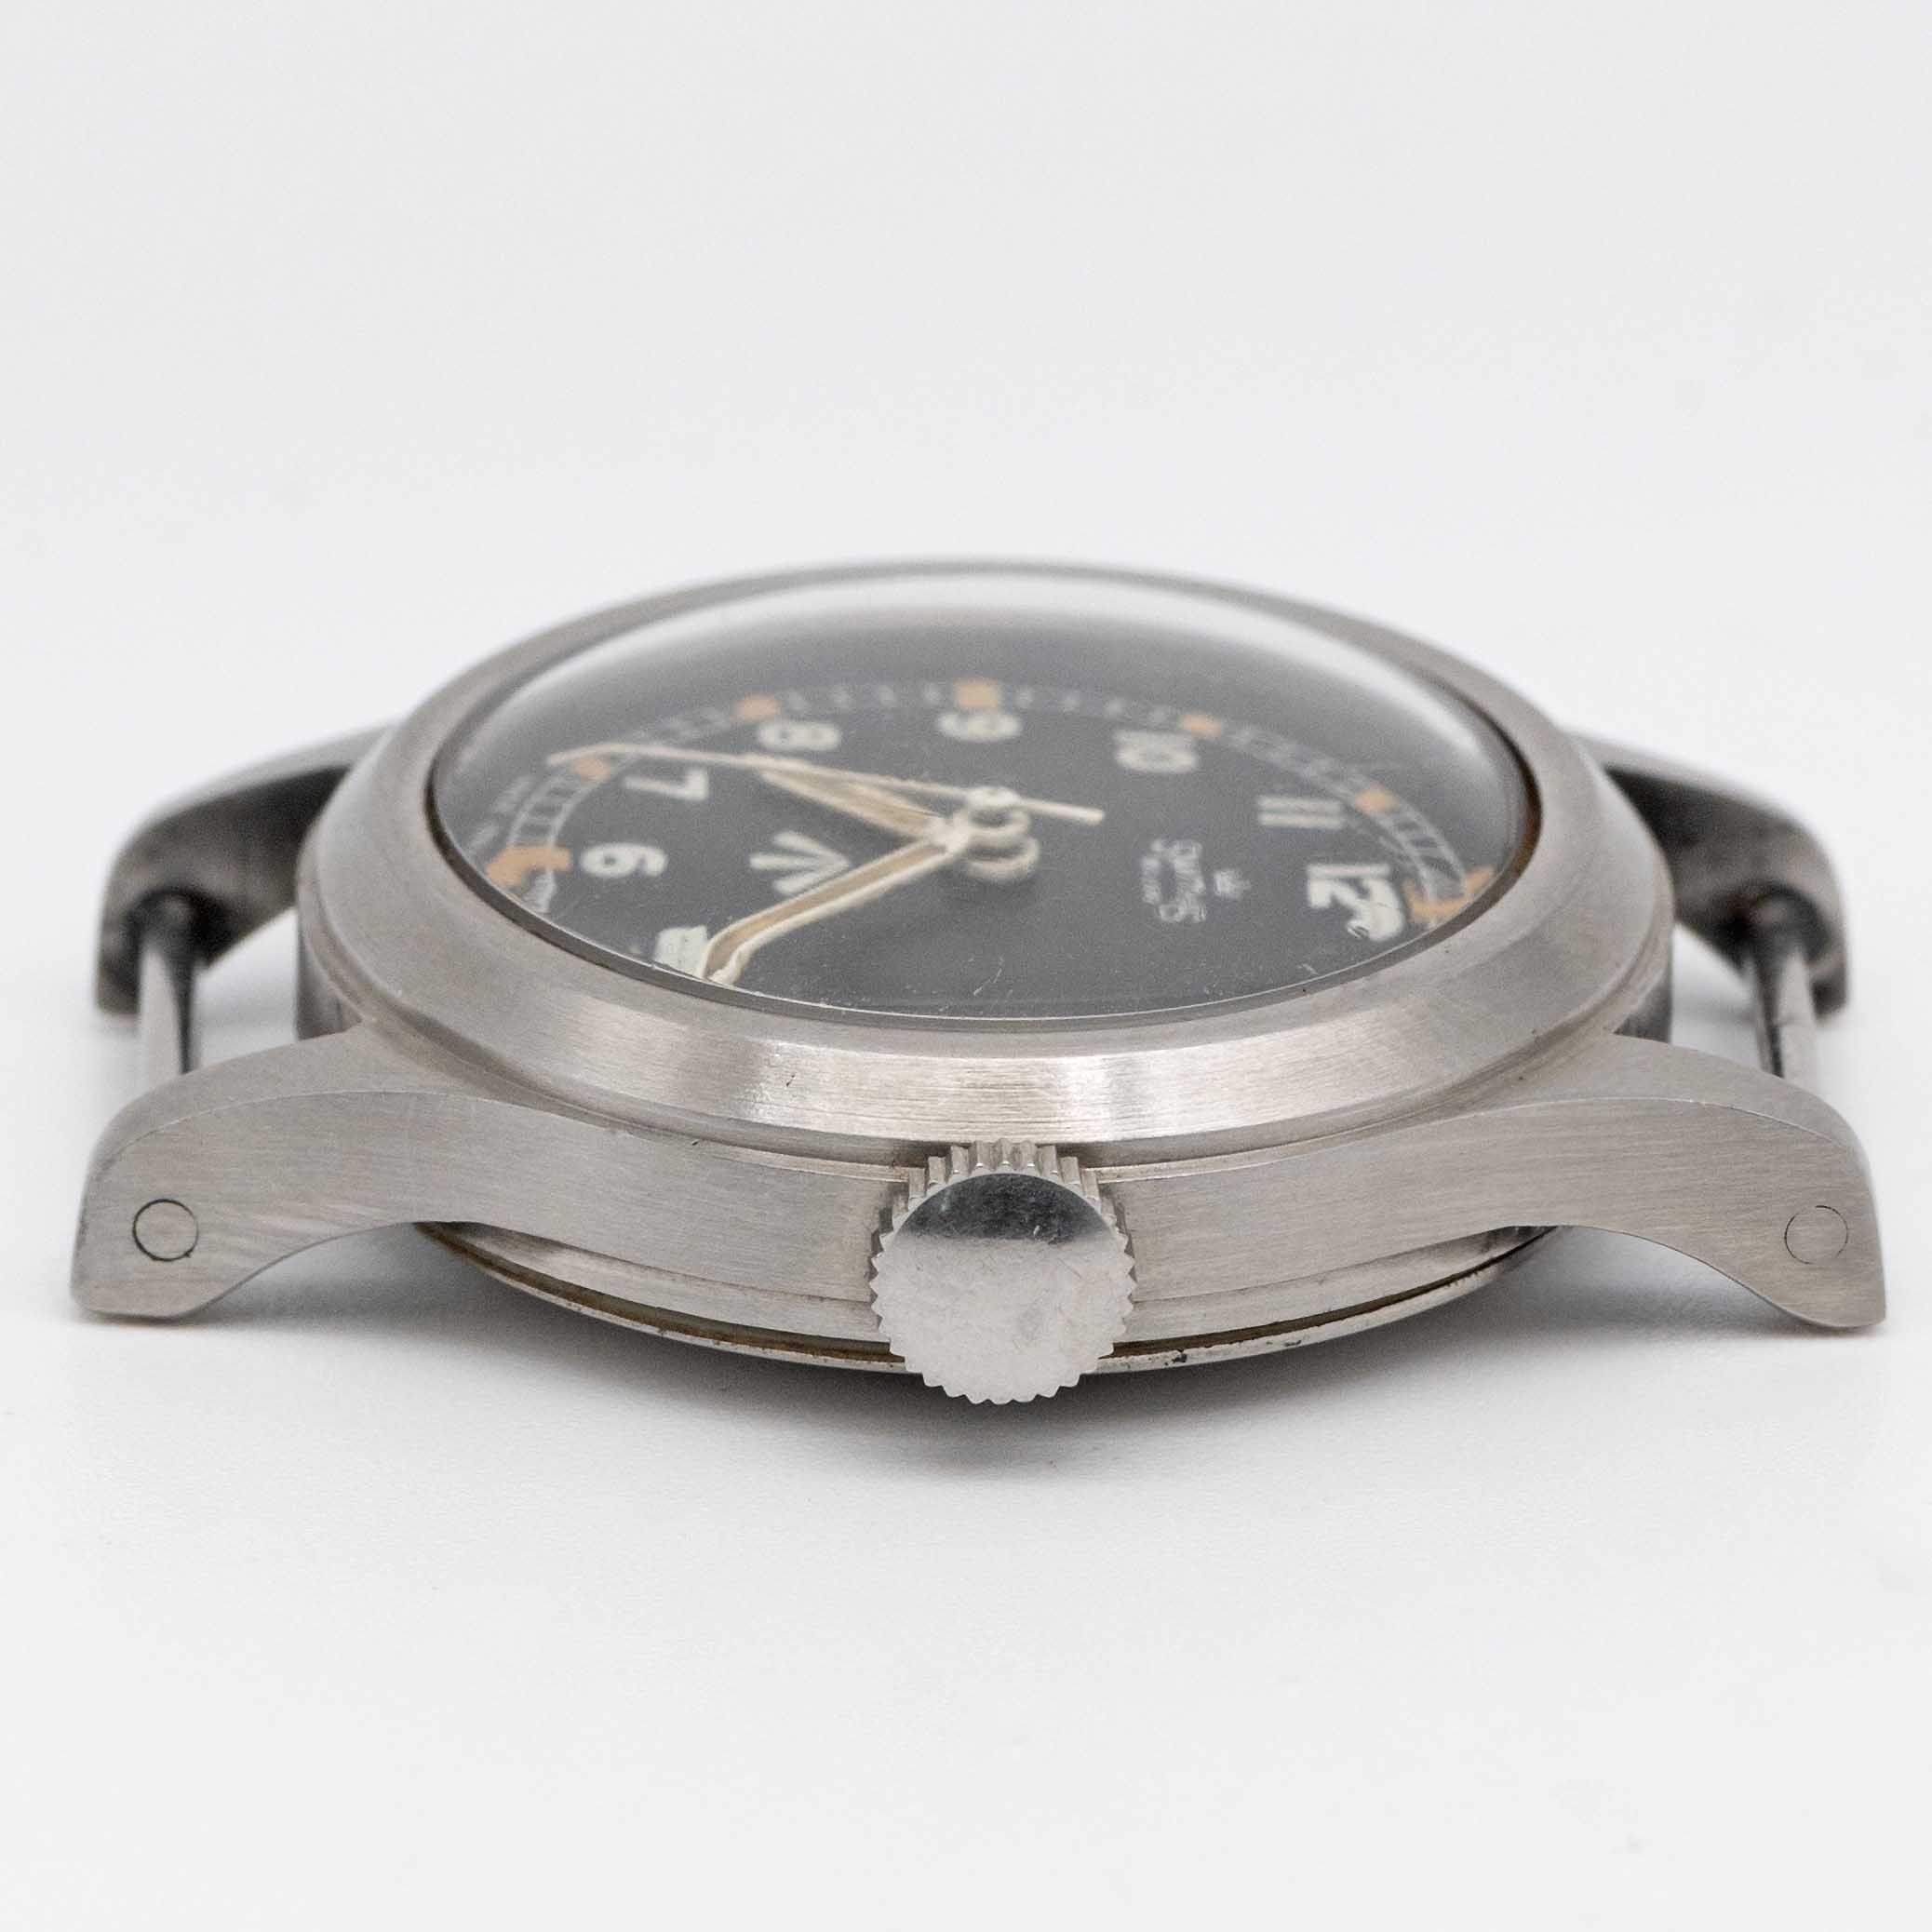 A VERY RARE GENTLEMAN'S STAINLESS STEEL BRITISH MILITARY SMITHS DE LUXE RAF PILOTS WRIST WATCH DATED - Image 10 of 11